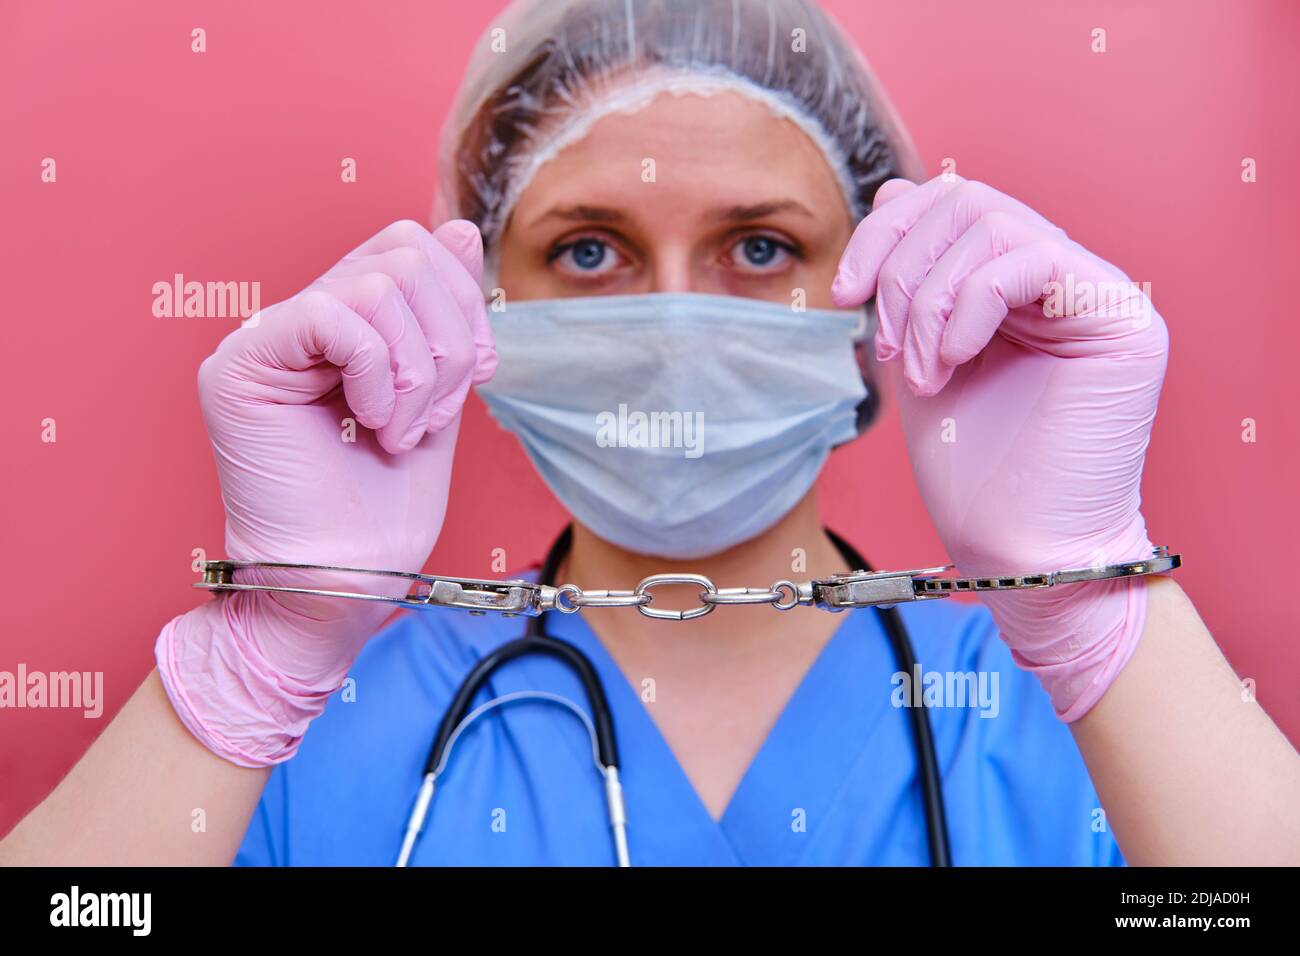 Doctor hands in handcuffs on pink background, close up. Young woman hands in medical gloves handcuffed, coronavirus quarantine concept. Stock Photo